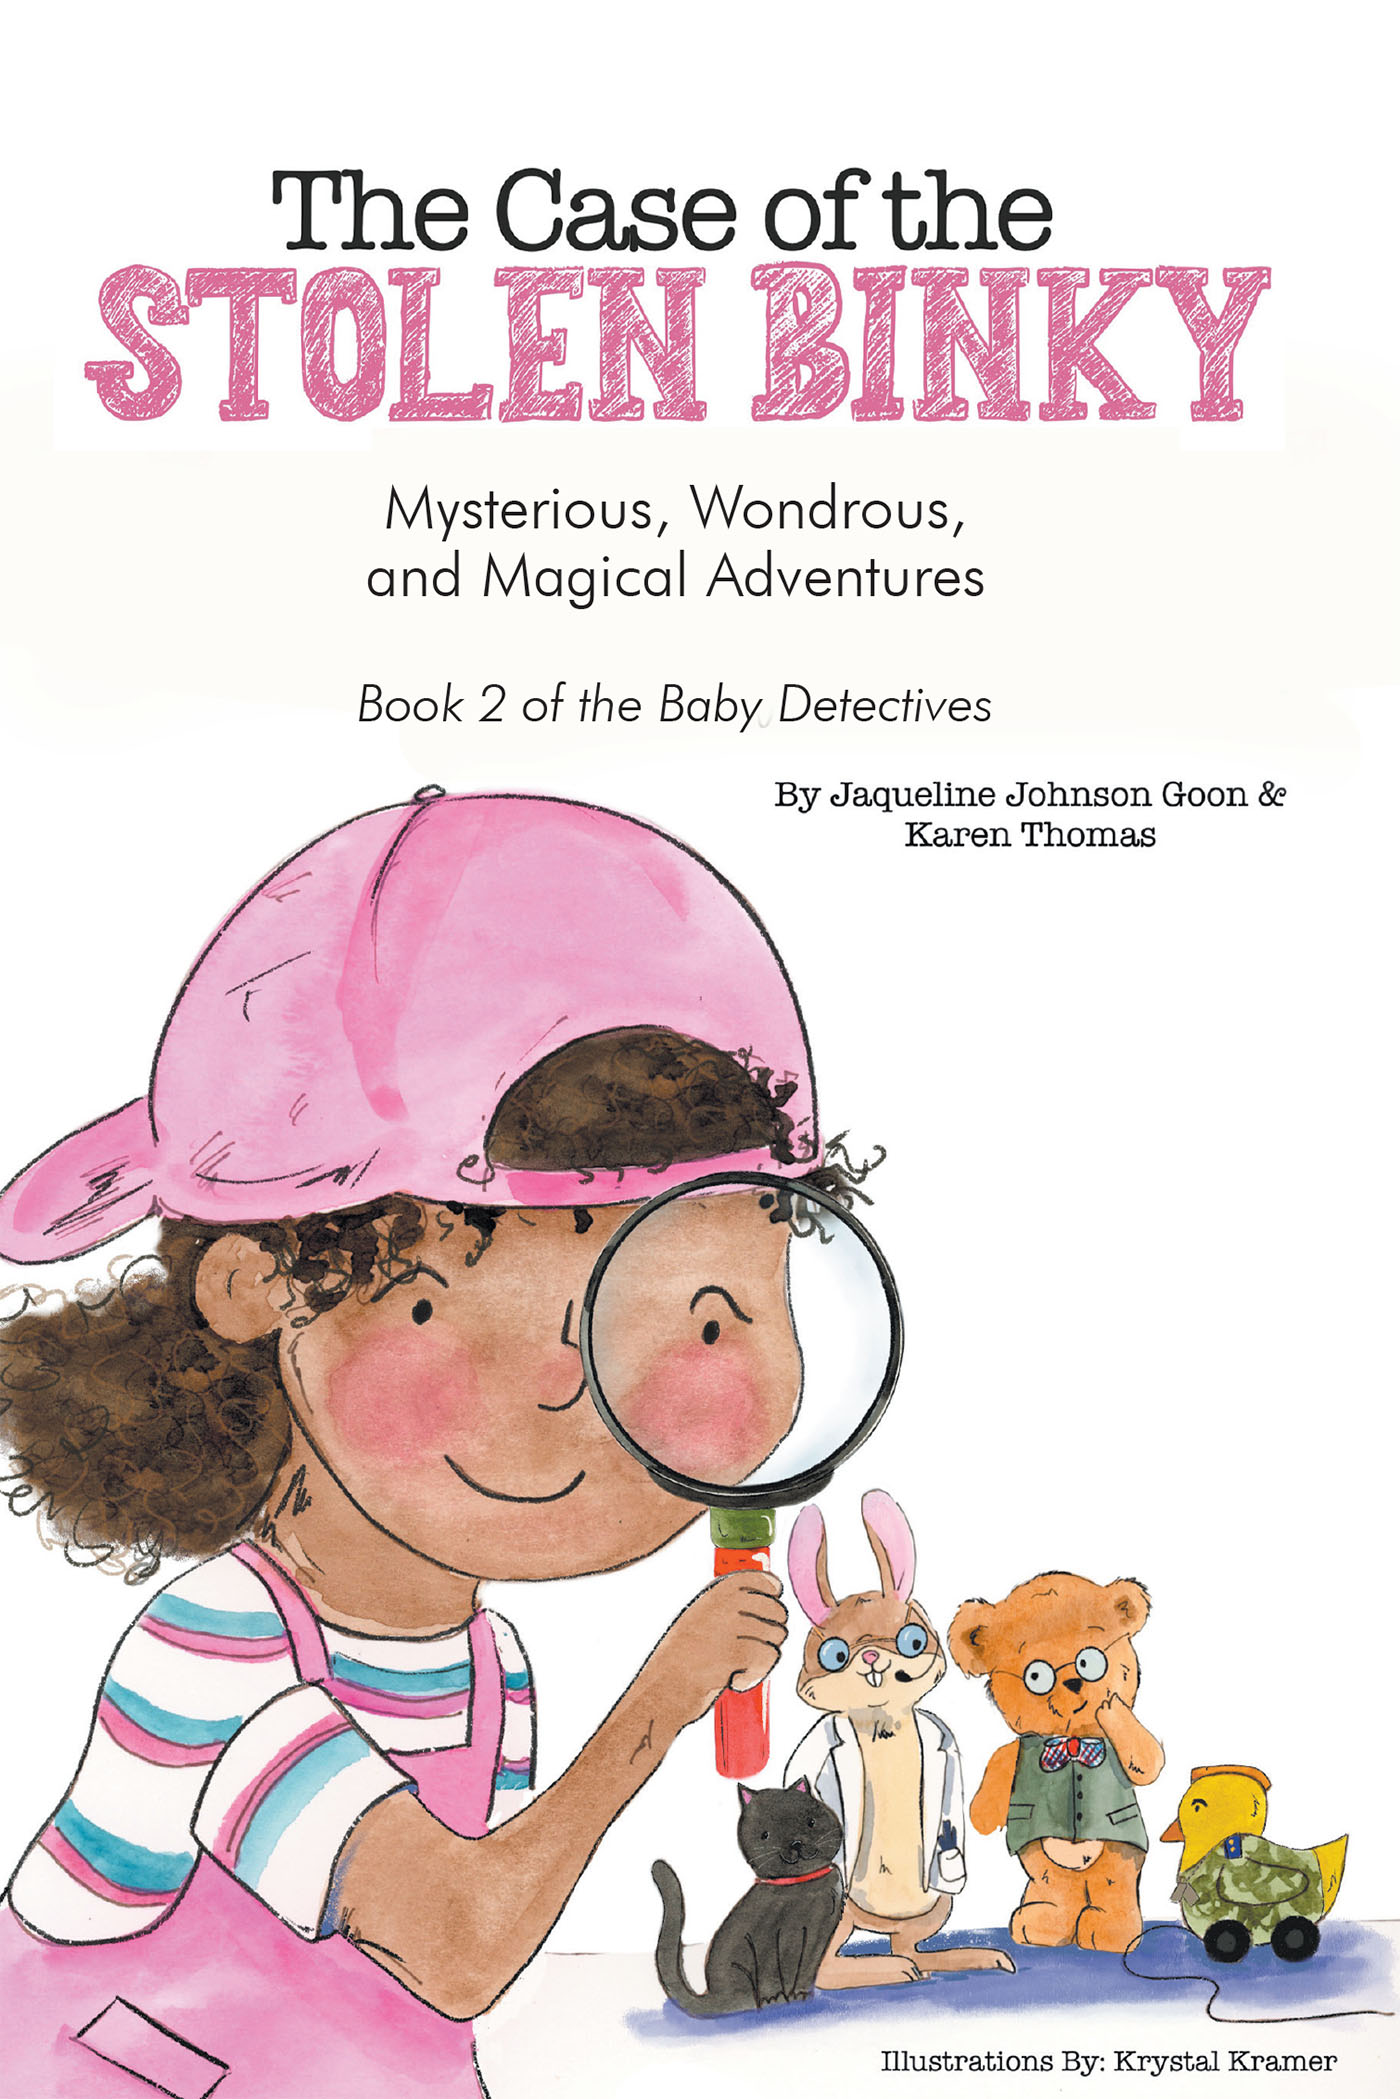 Jacqueline Johnson Goon and Karen Thomas’s Newly Released "The Case of the Stolen Binky" is an Exciting Detective Tale for Young Readers